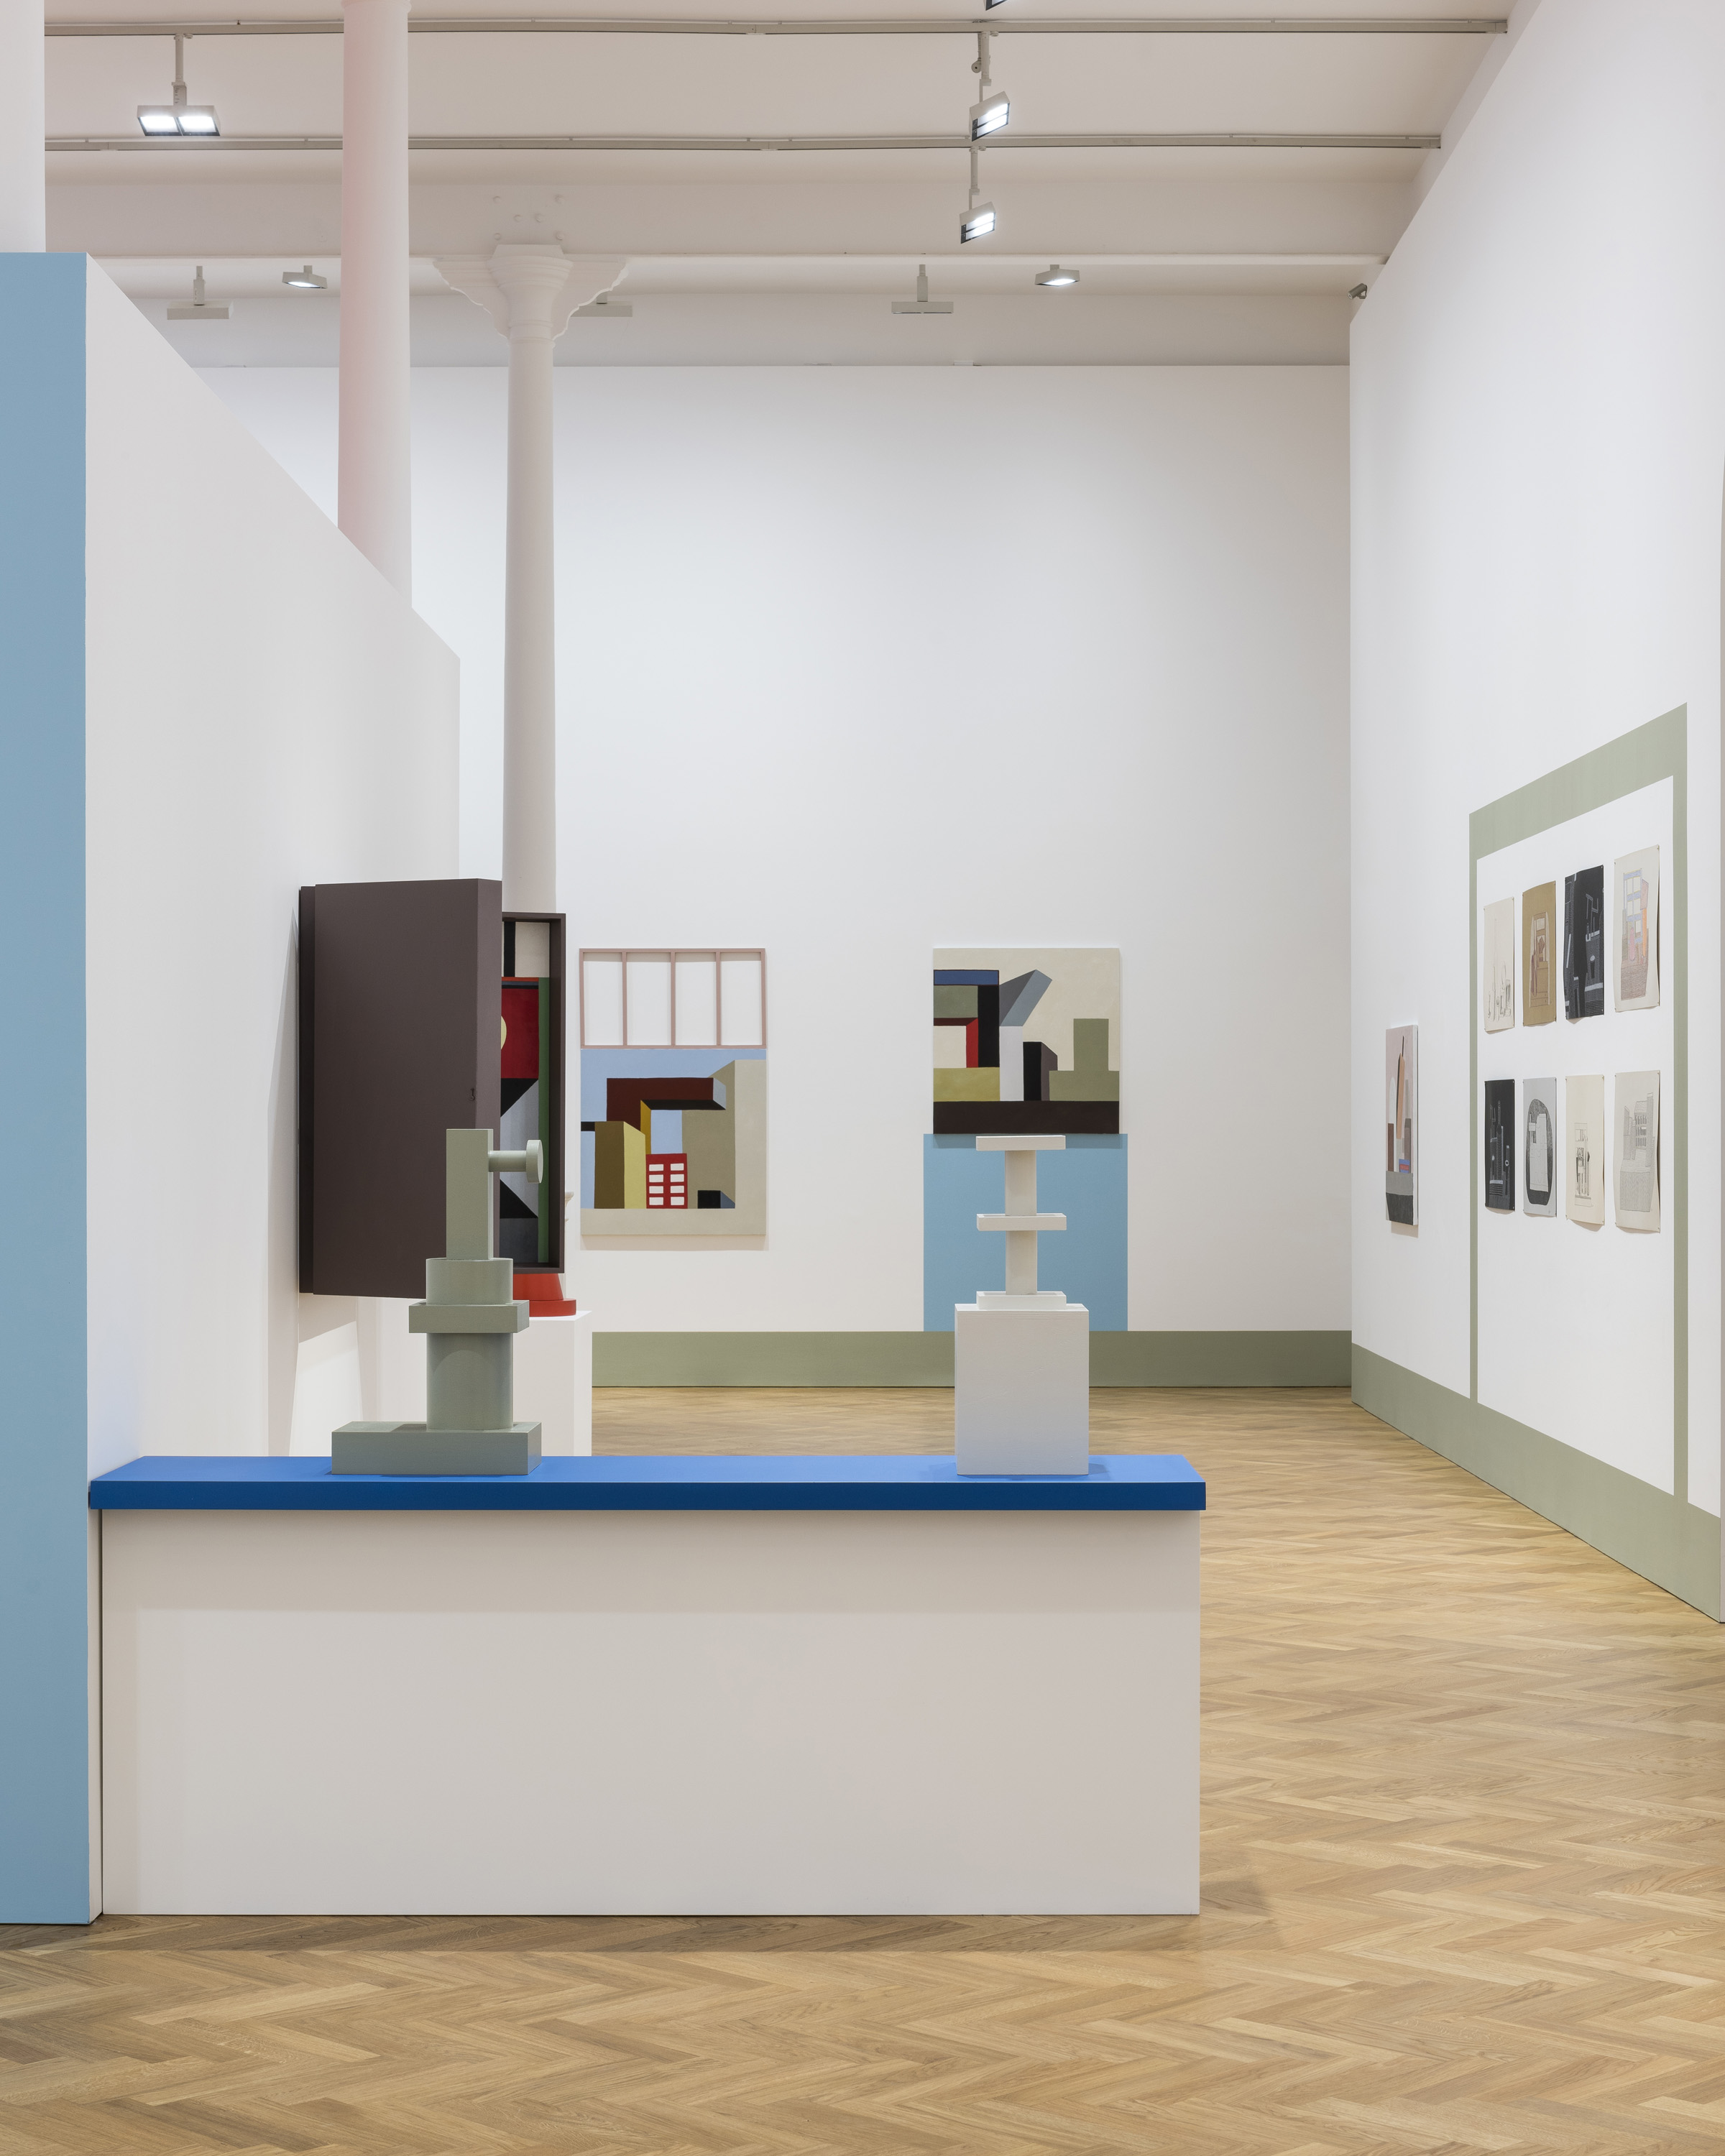 An installation view of Nathalie Du Pasquier's new exhibition at Pace in London. Copyright Nathalie Du Pasquier, Courtesy Pace Gallery